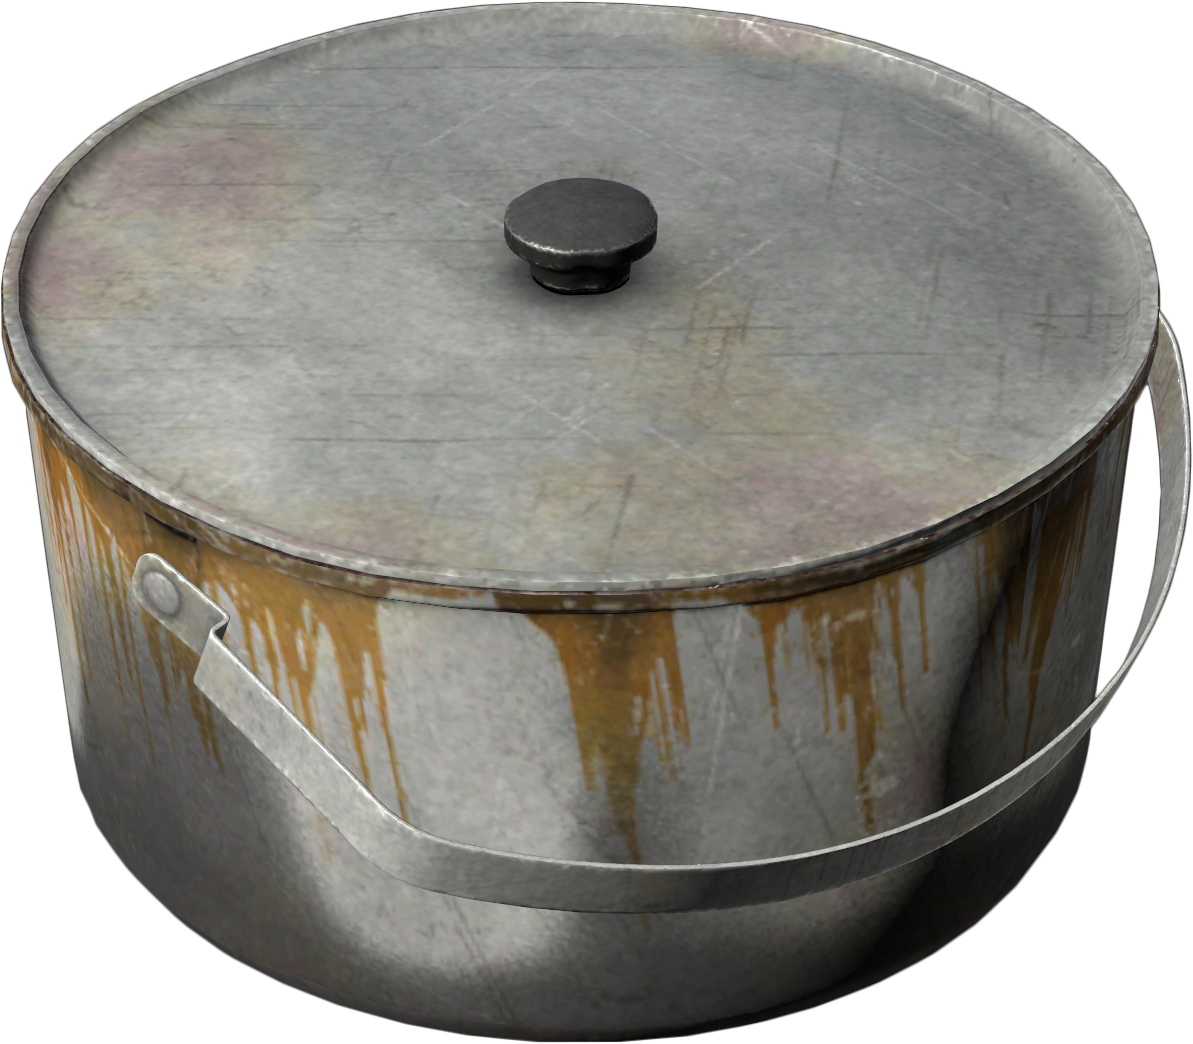 https://static.wikia.nocookie.net/dayz_gamepedia/images/f/f9/Cooking_Pot.png/revision/latest?cb=20170506153626